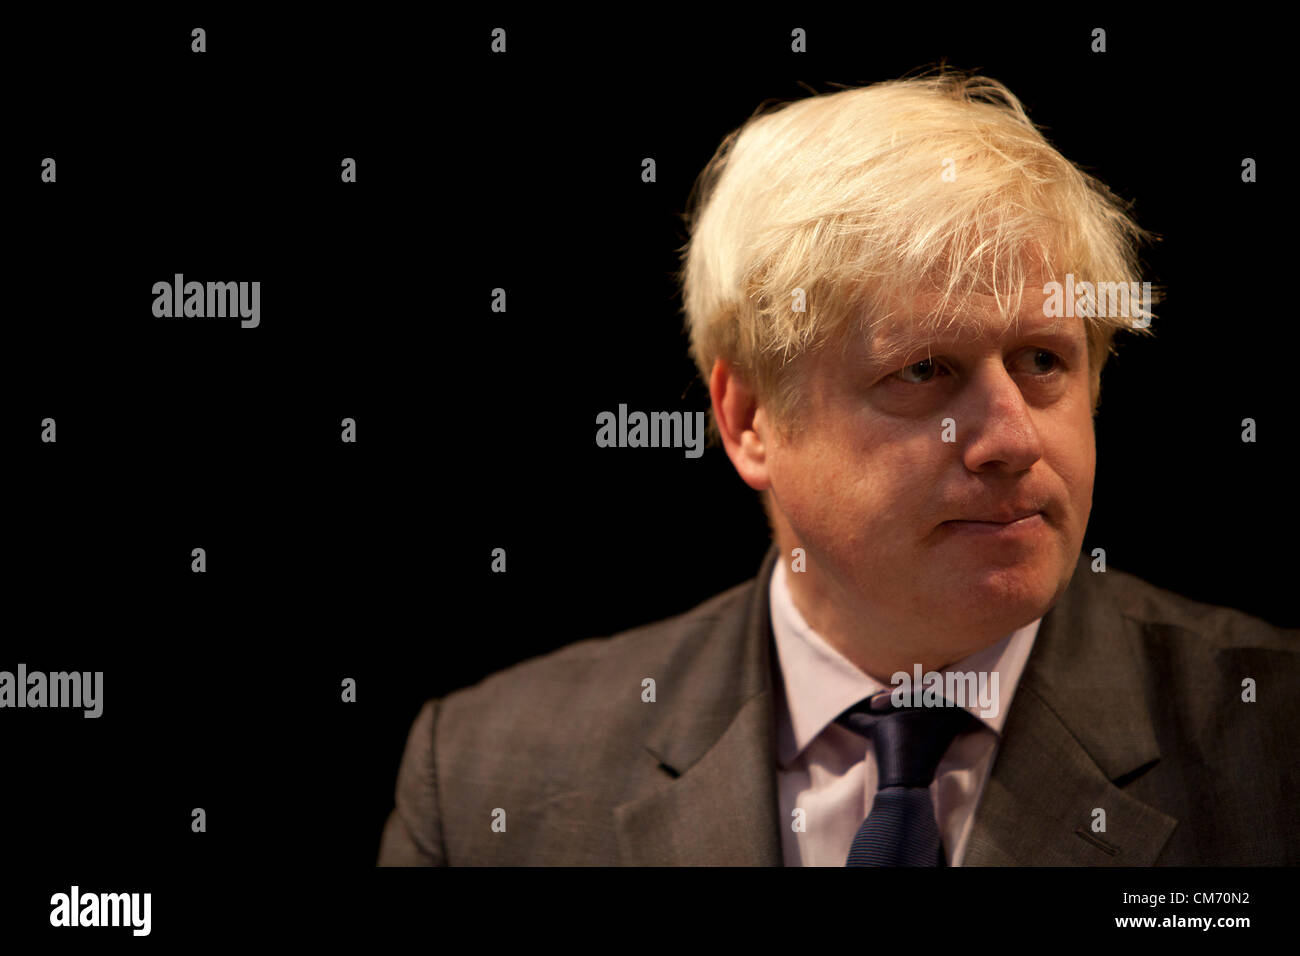 The Mayor of London, Boris Johnson speaks at Pimlico Academy announcing plans to make London a world leader in education. Stock Photo